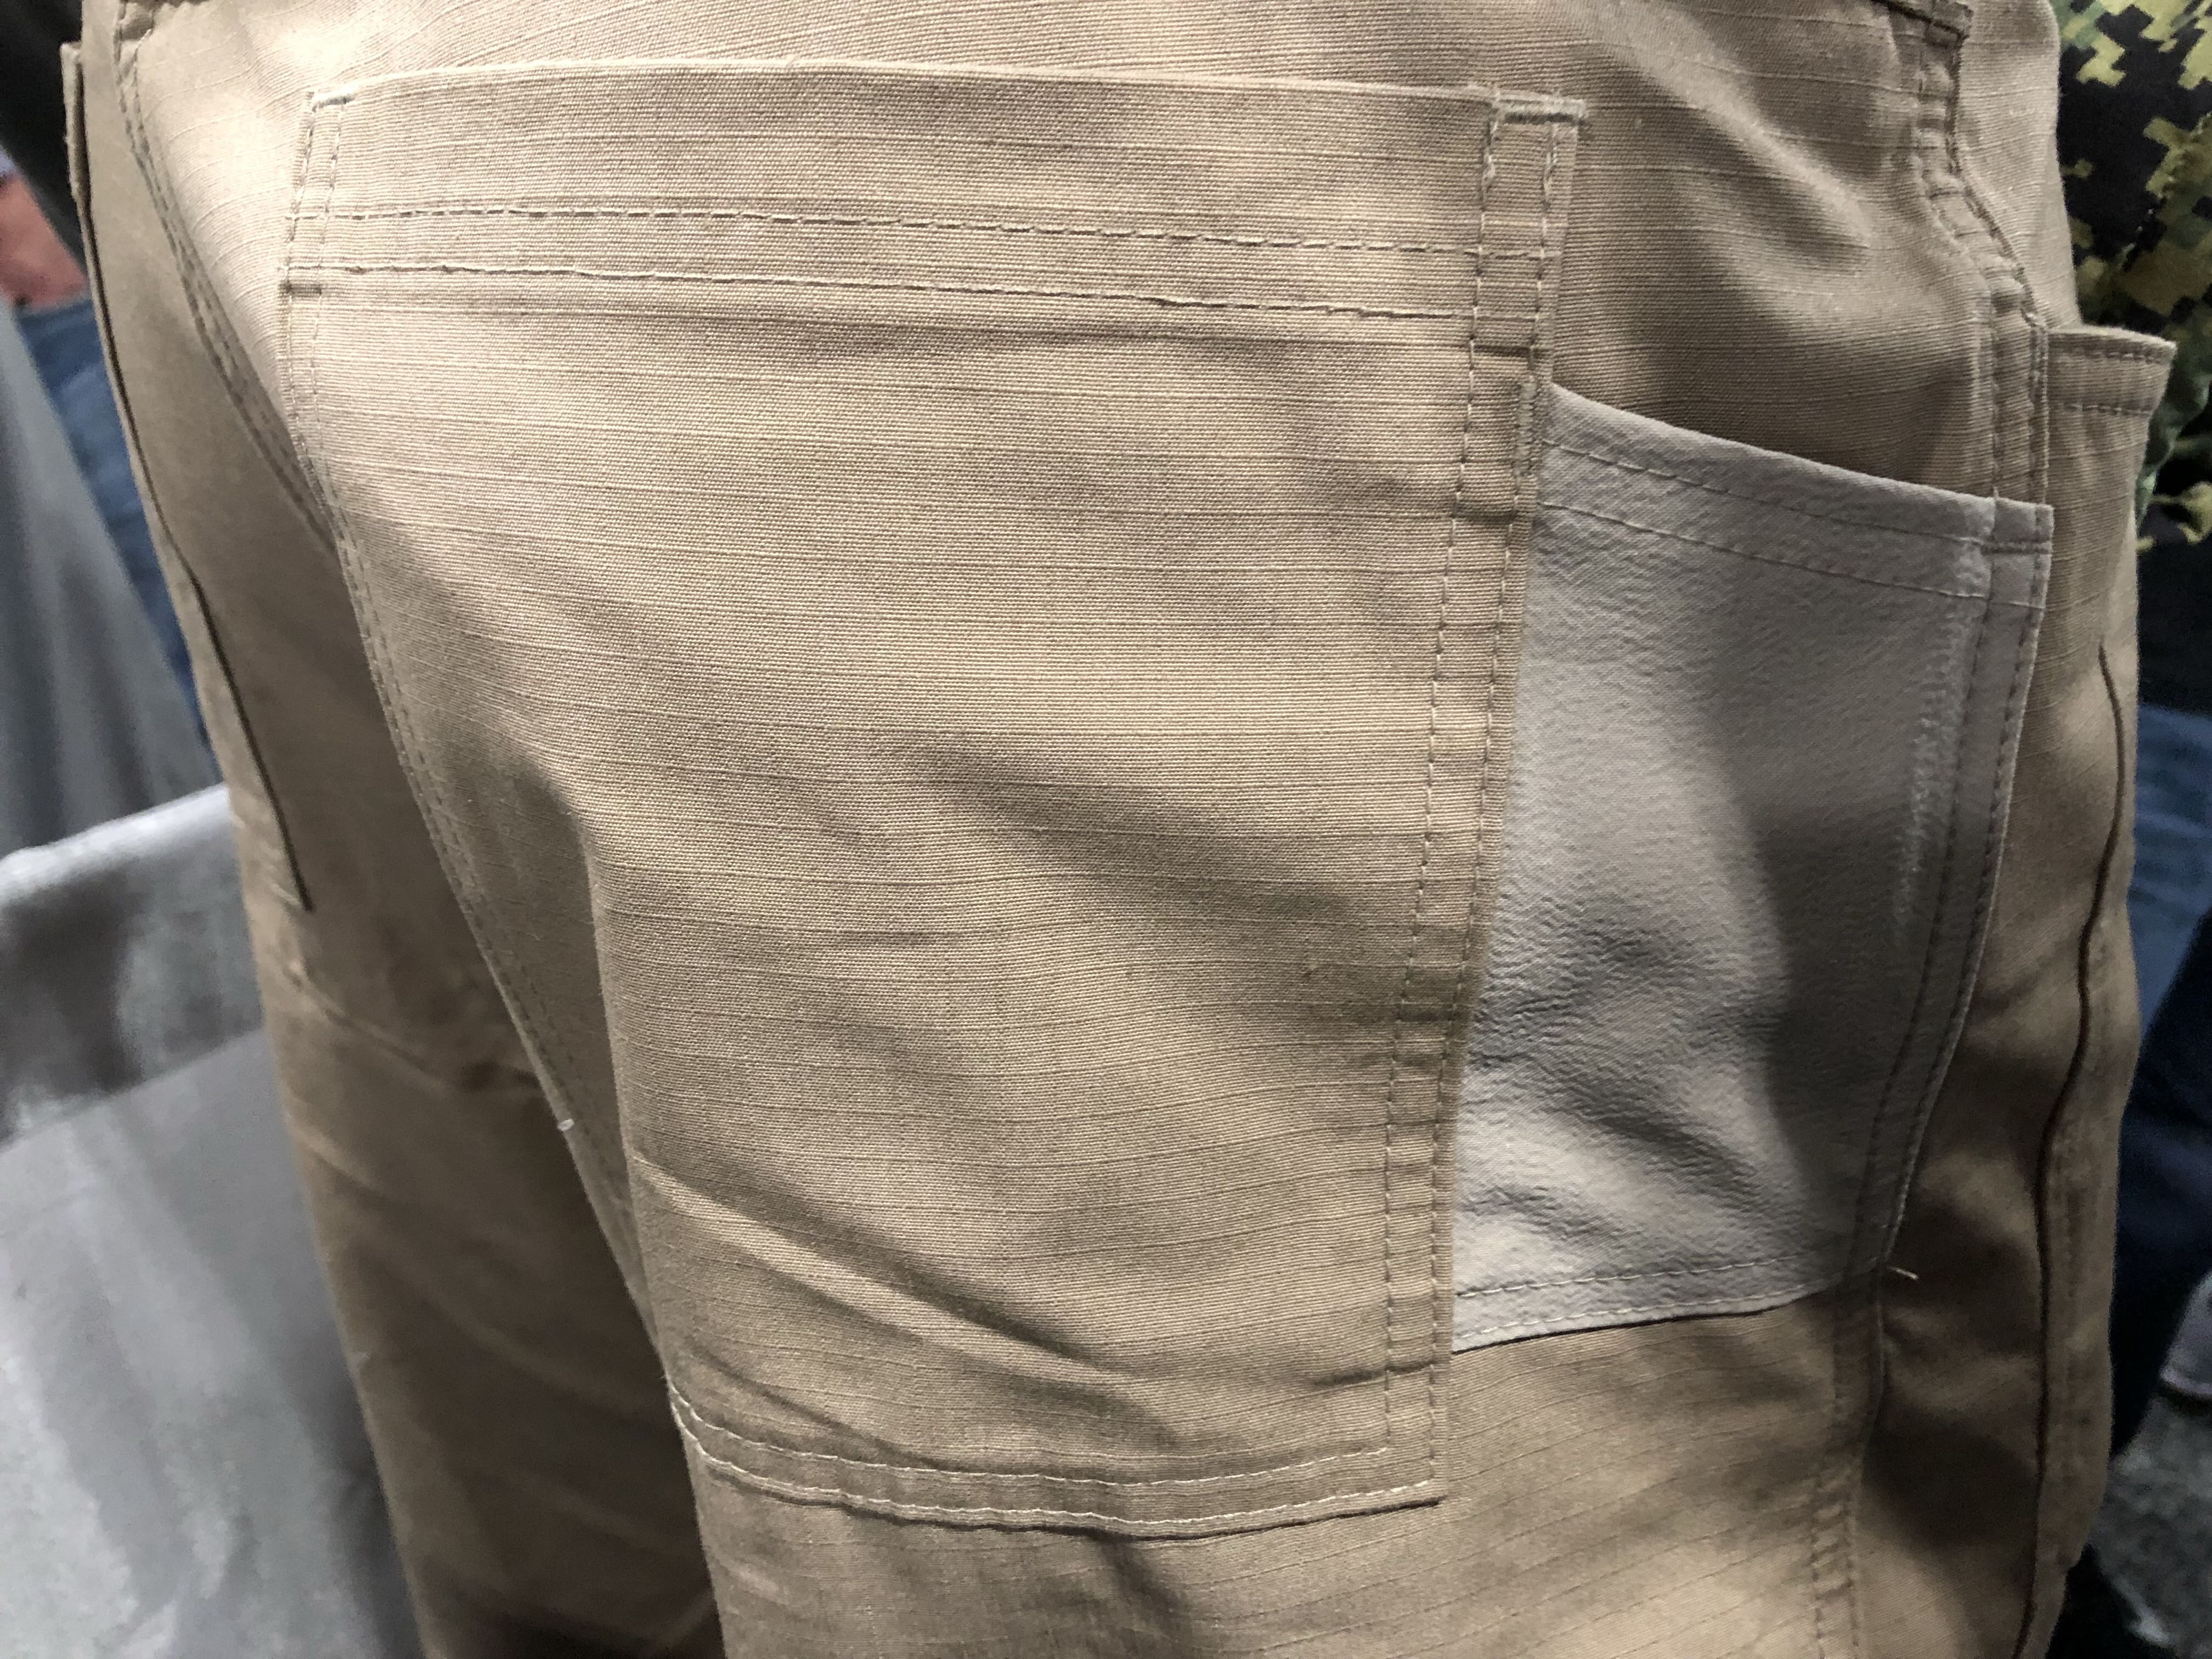 FirstSpear Friday Focus - Centurion Pant Sneak Peek - Soldier Systems Daily